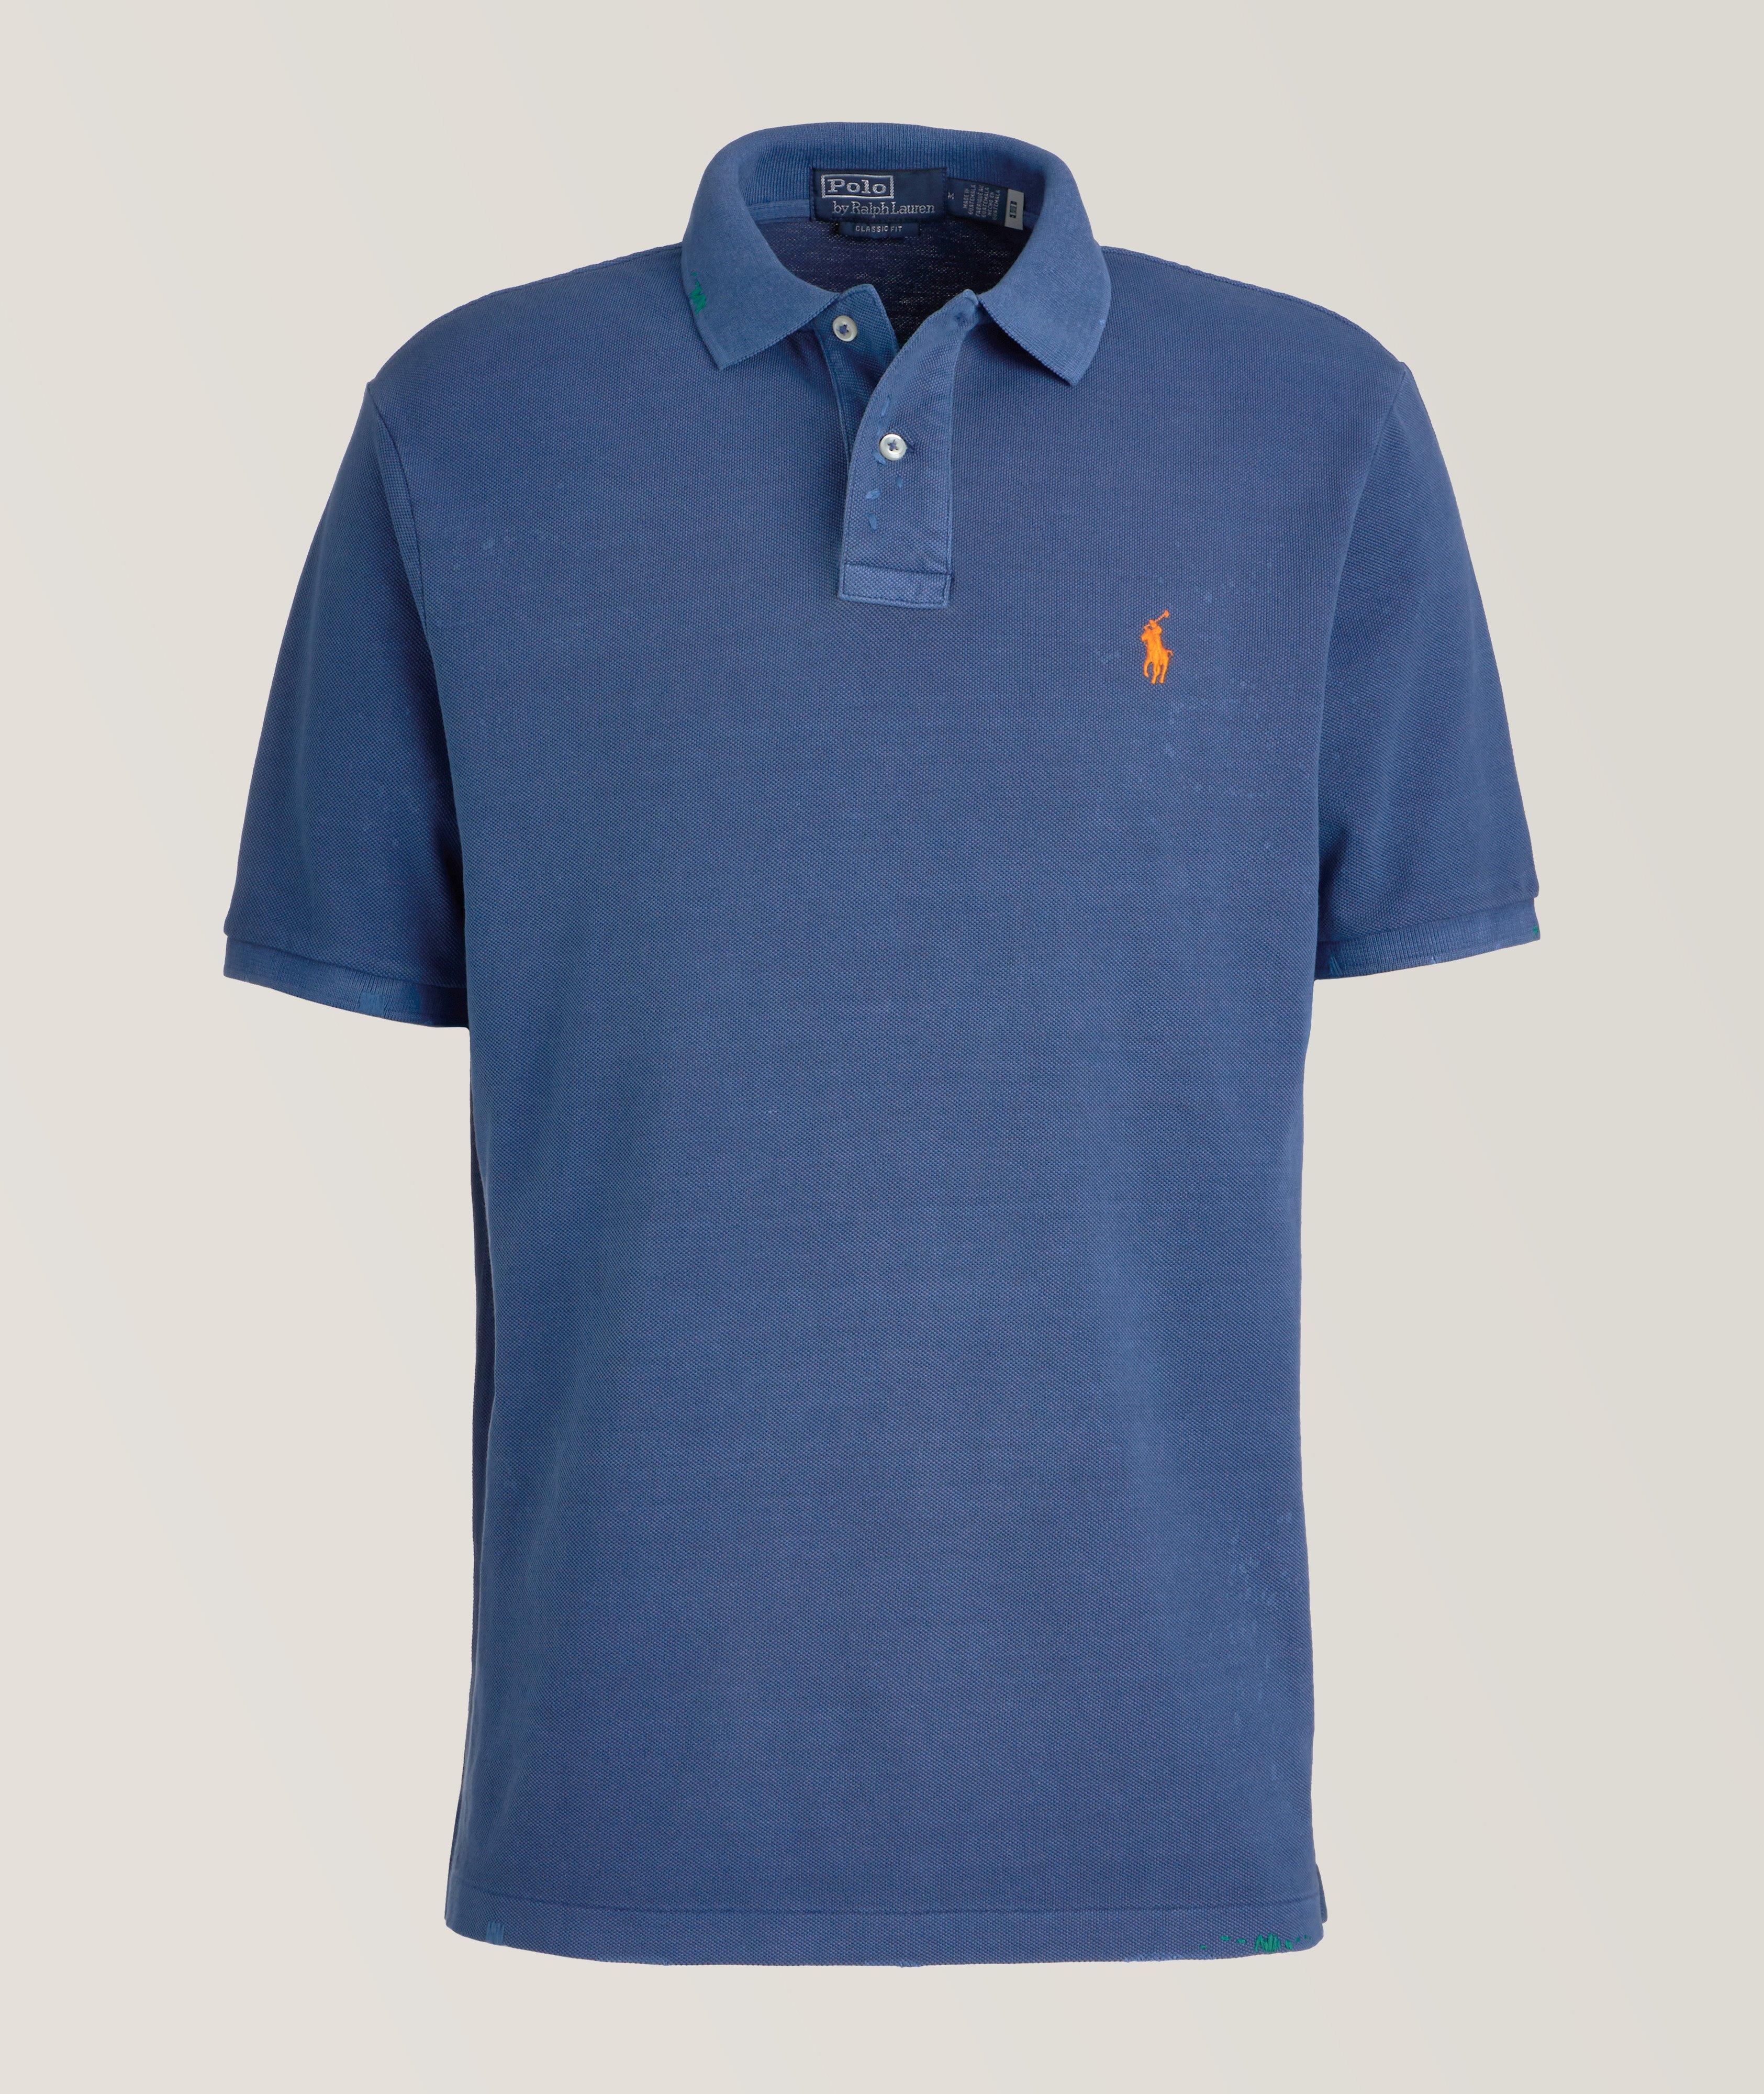 Distressed & Asymmetrically Stitched Cotton Polo  image 0